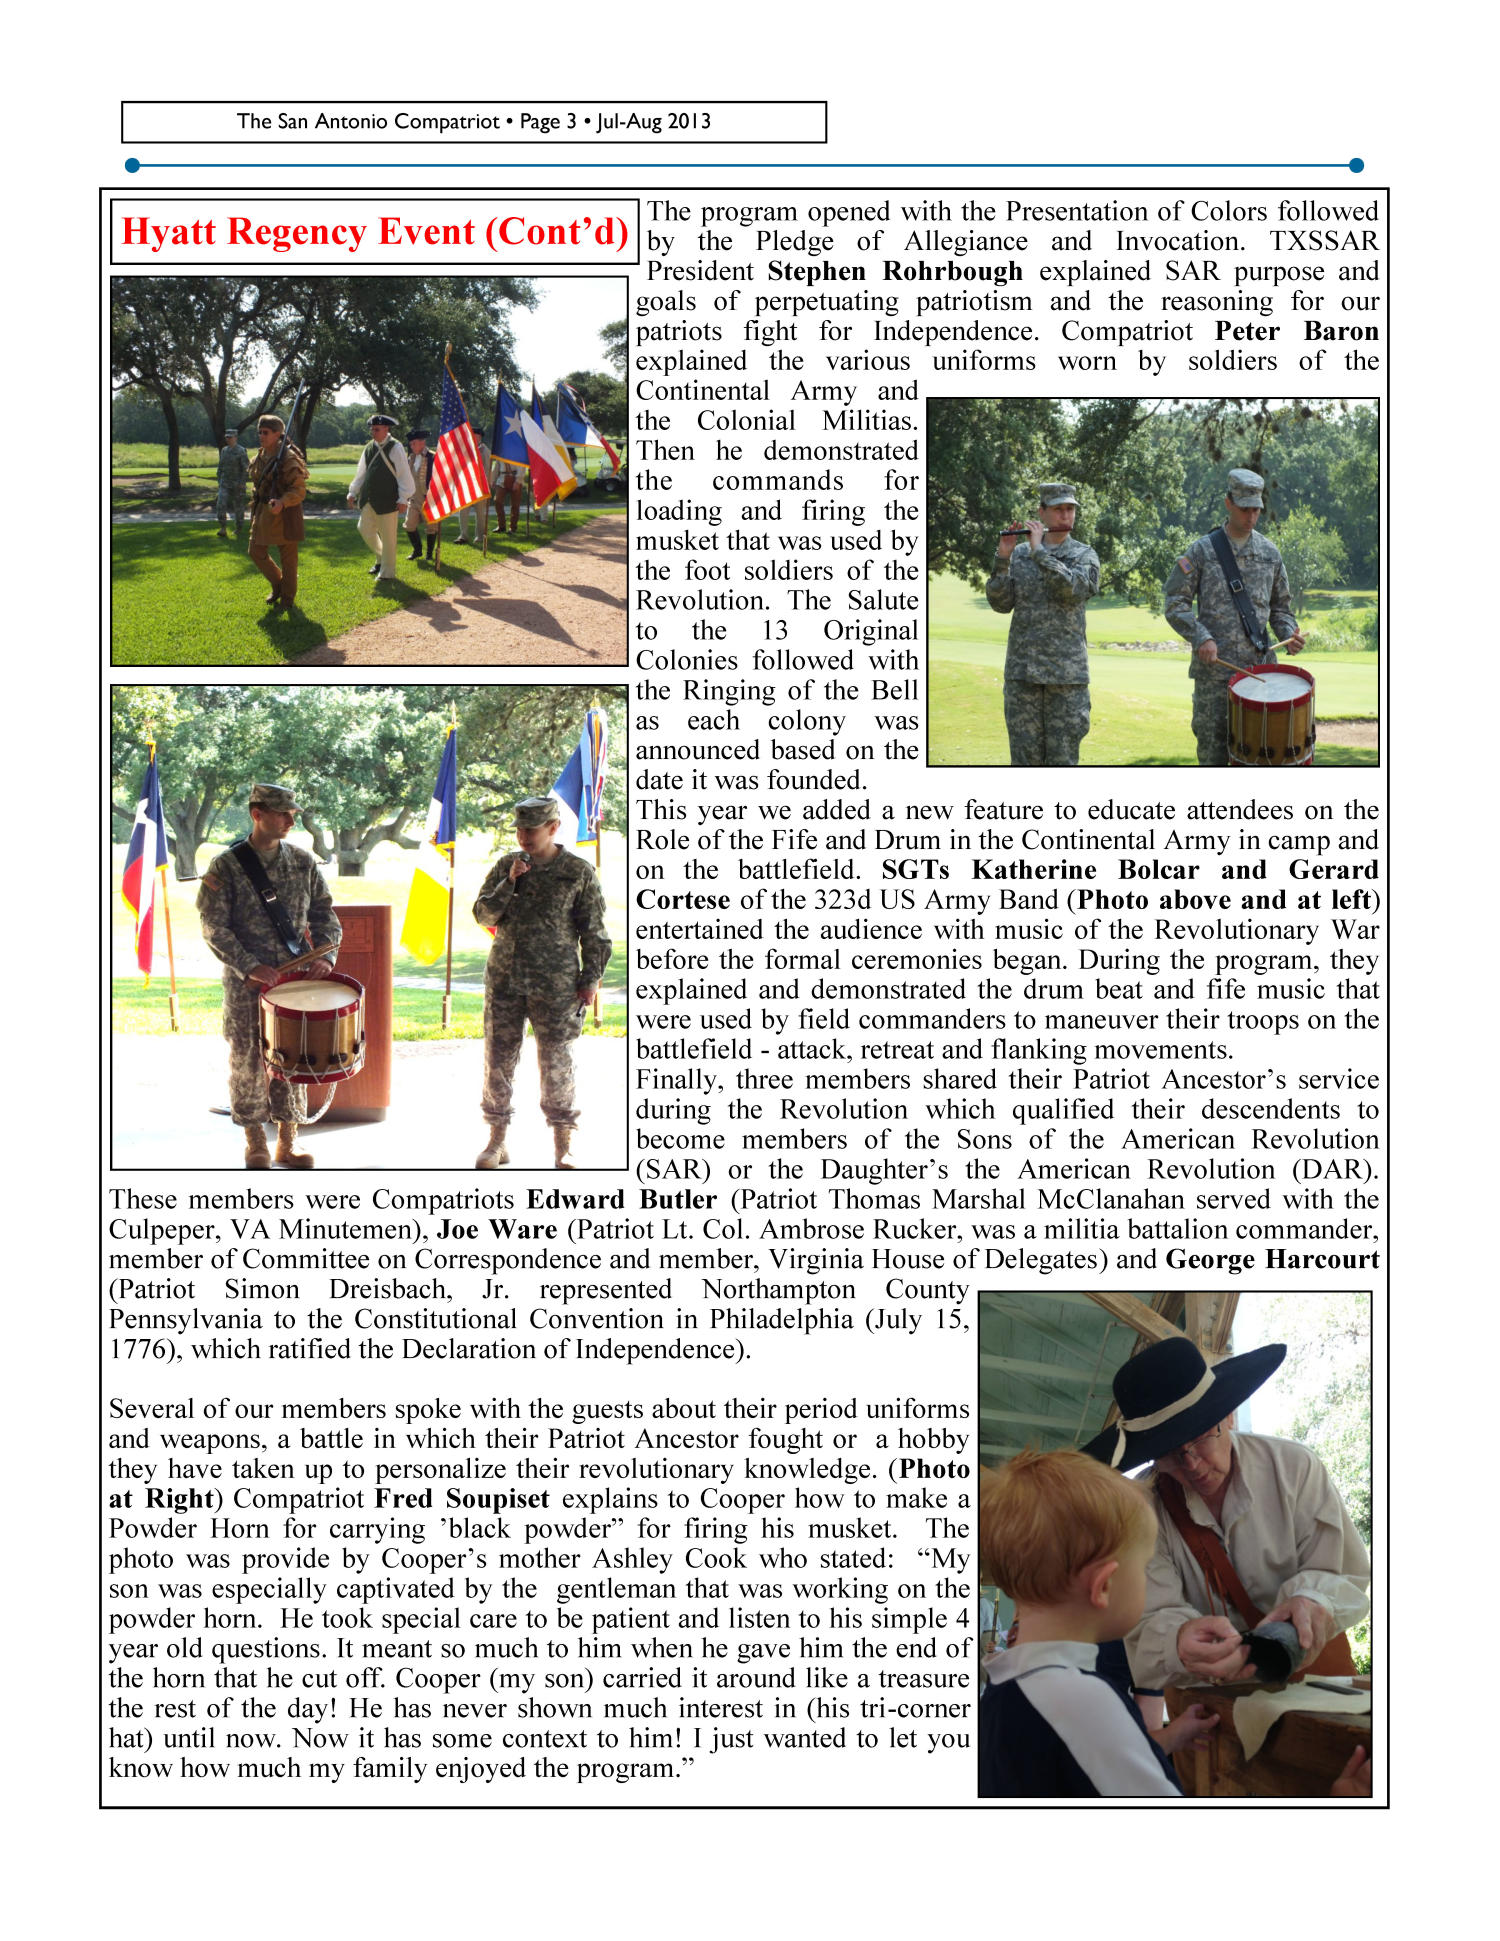 The San Antonio Compatriot, July/August 2013
                                                
                                                    [Sequence #]: 3 of 5
                                                